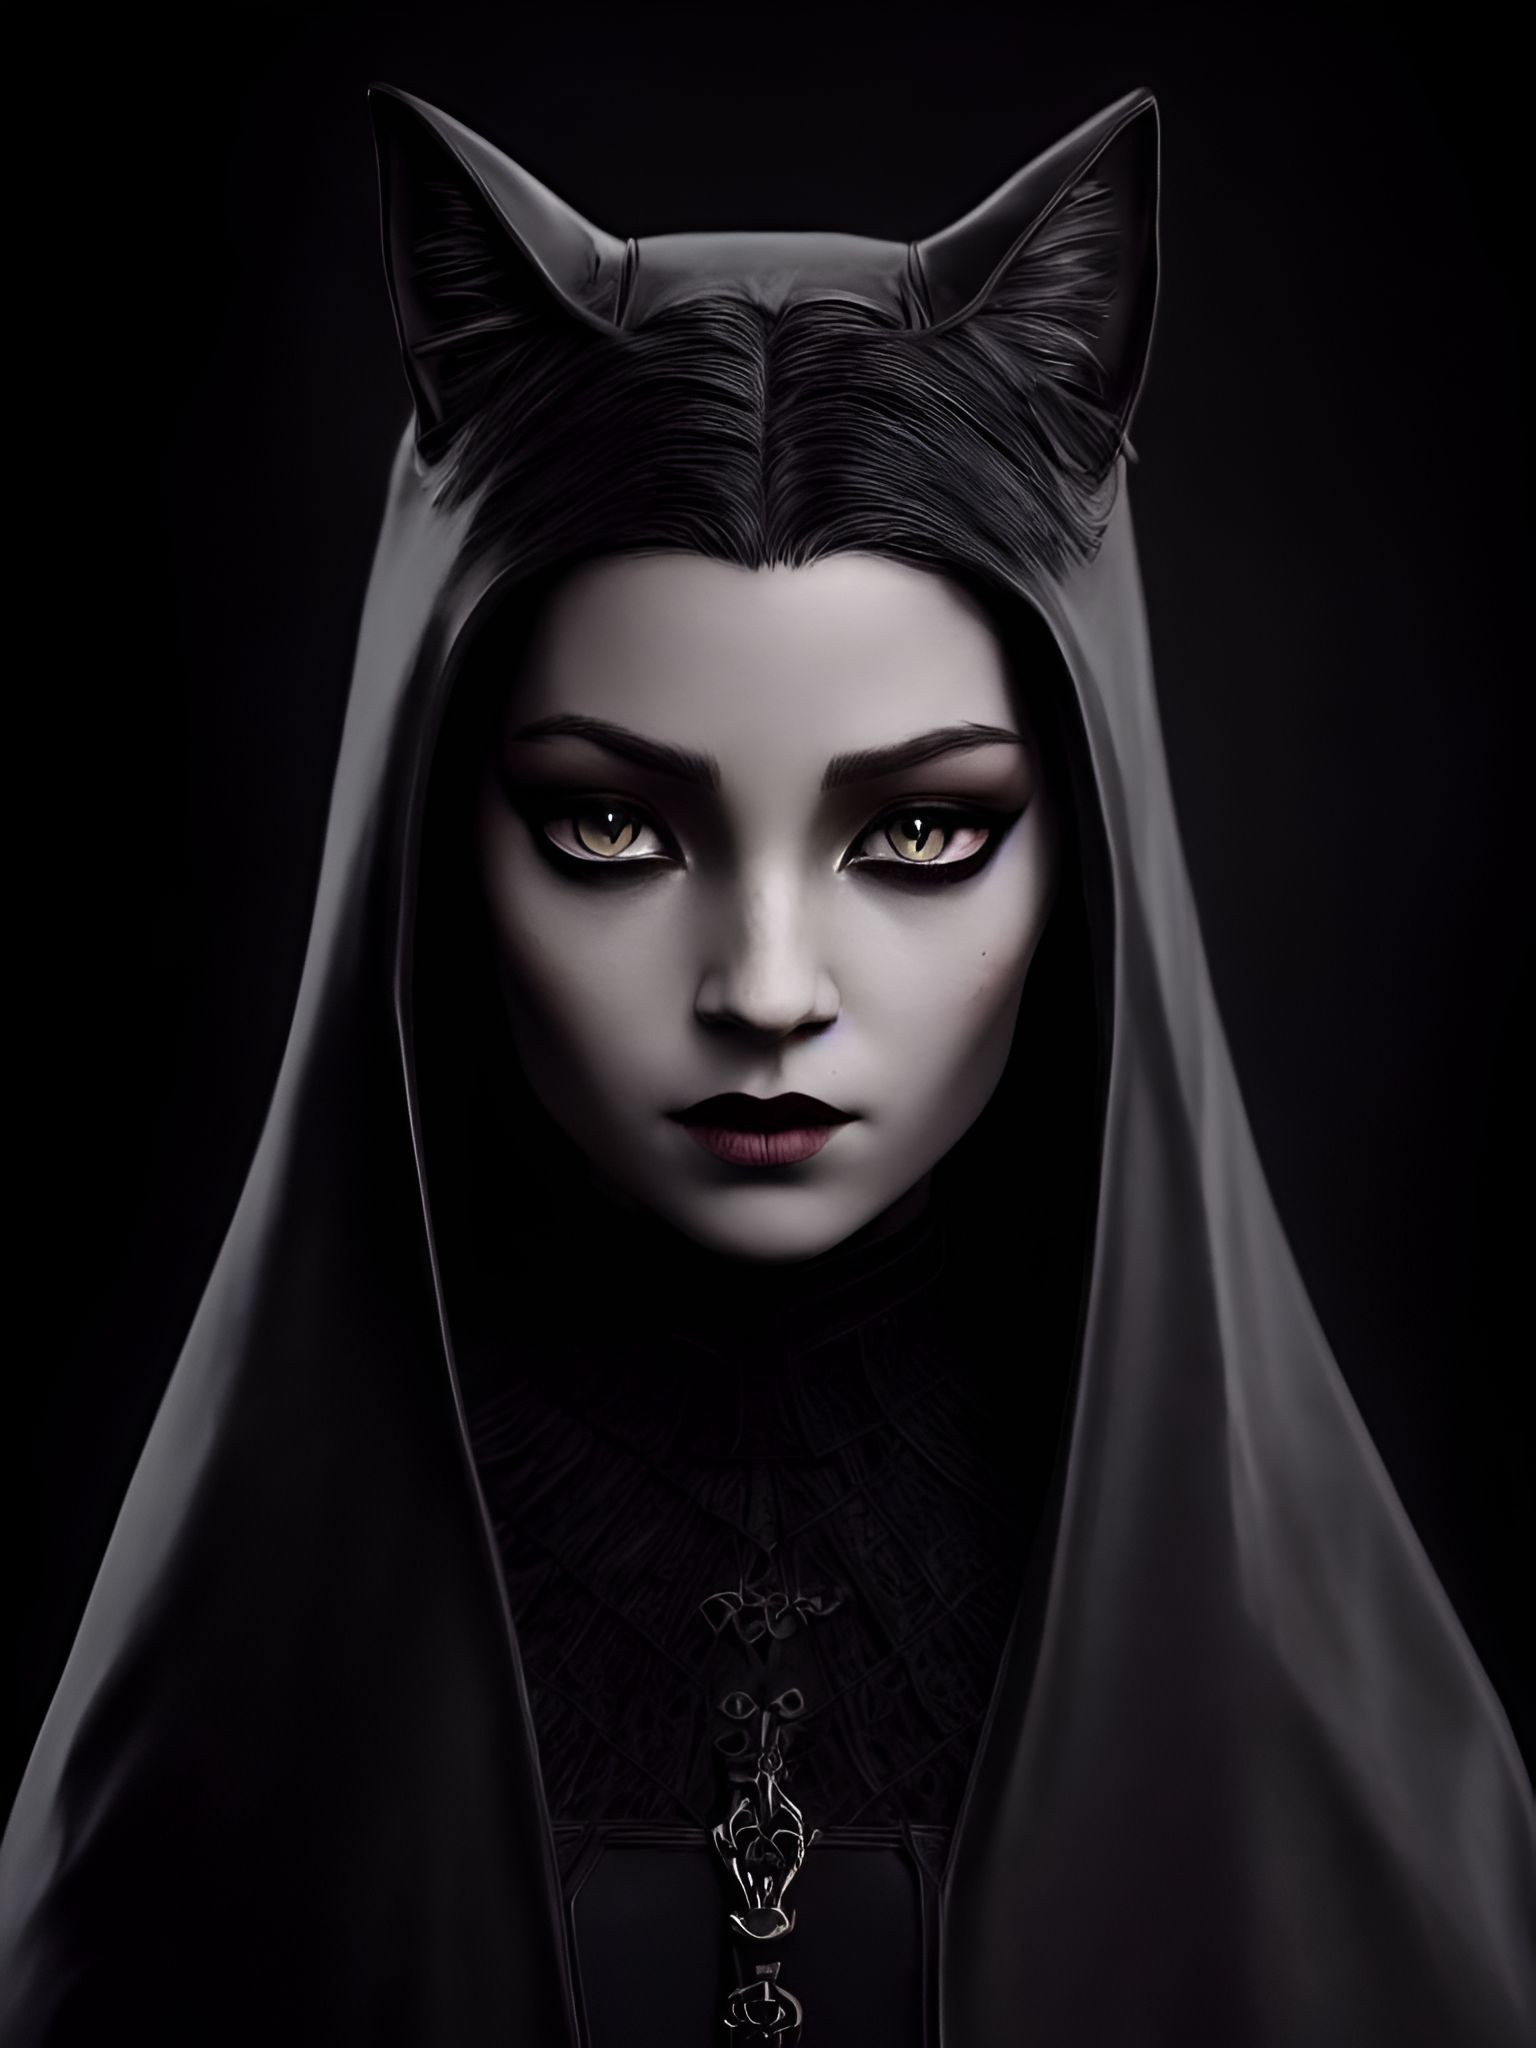 Anthropomorphic, Beautiful and highly detailed photorealistic character portrait of a Wednesday Addams as a young tabaxi humanoid woman with black fur all over her face and body, wearing a black cloak and a hood trimmed with silver, subject is a cat person with black fur and a jaguar face
wearing a black gothic style dress, character is a cat person with black fur , warm vibrant color tone, 16mm film quality of with film grain, UHD, perfect white balance, Alberto, Canon EOS R6, Prime lens photography, perfectly balanced dim lighting, Real human skin, White balance, Sharp details